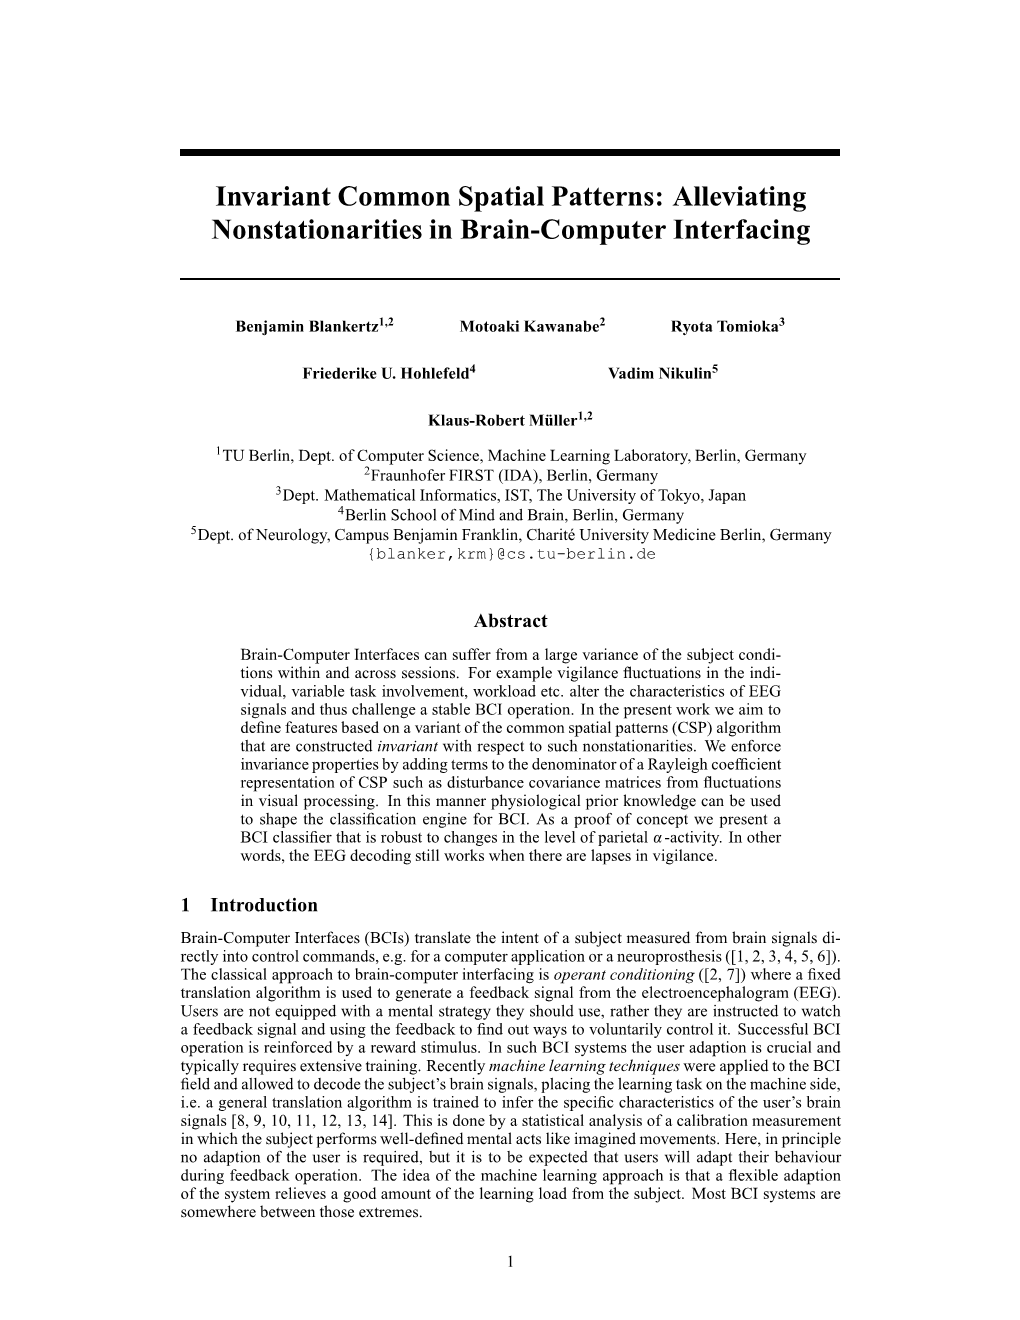 Invariant Common Spatial Patterns: Alleviating Nonstationarities in Brain-Computer Interfacing